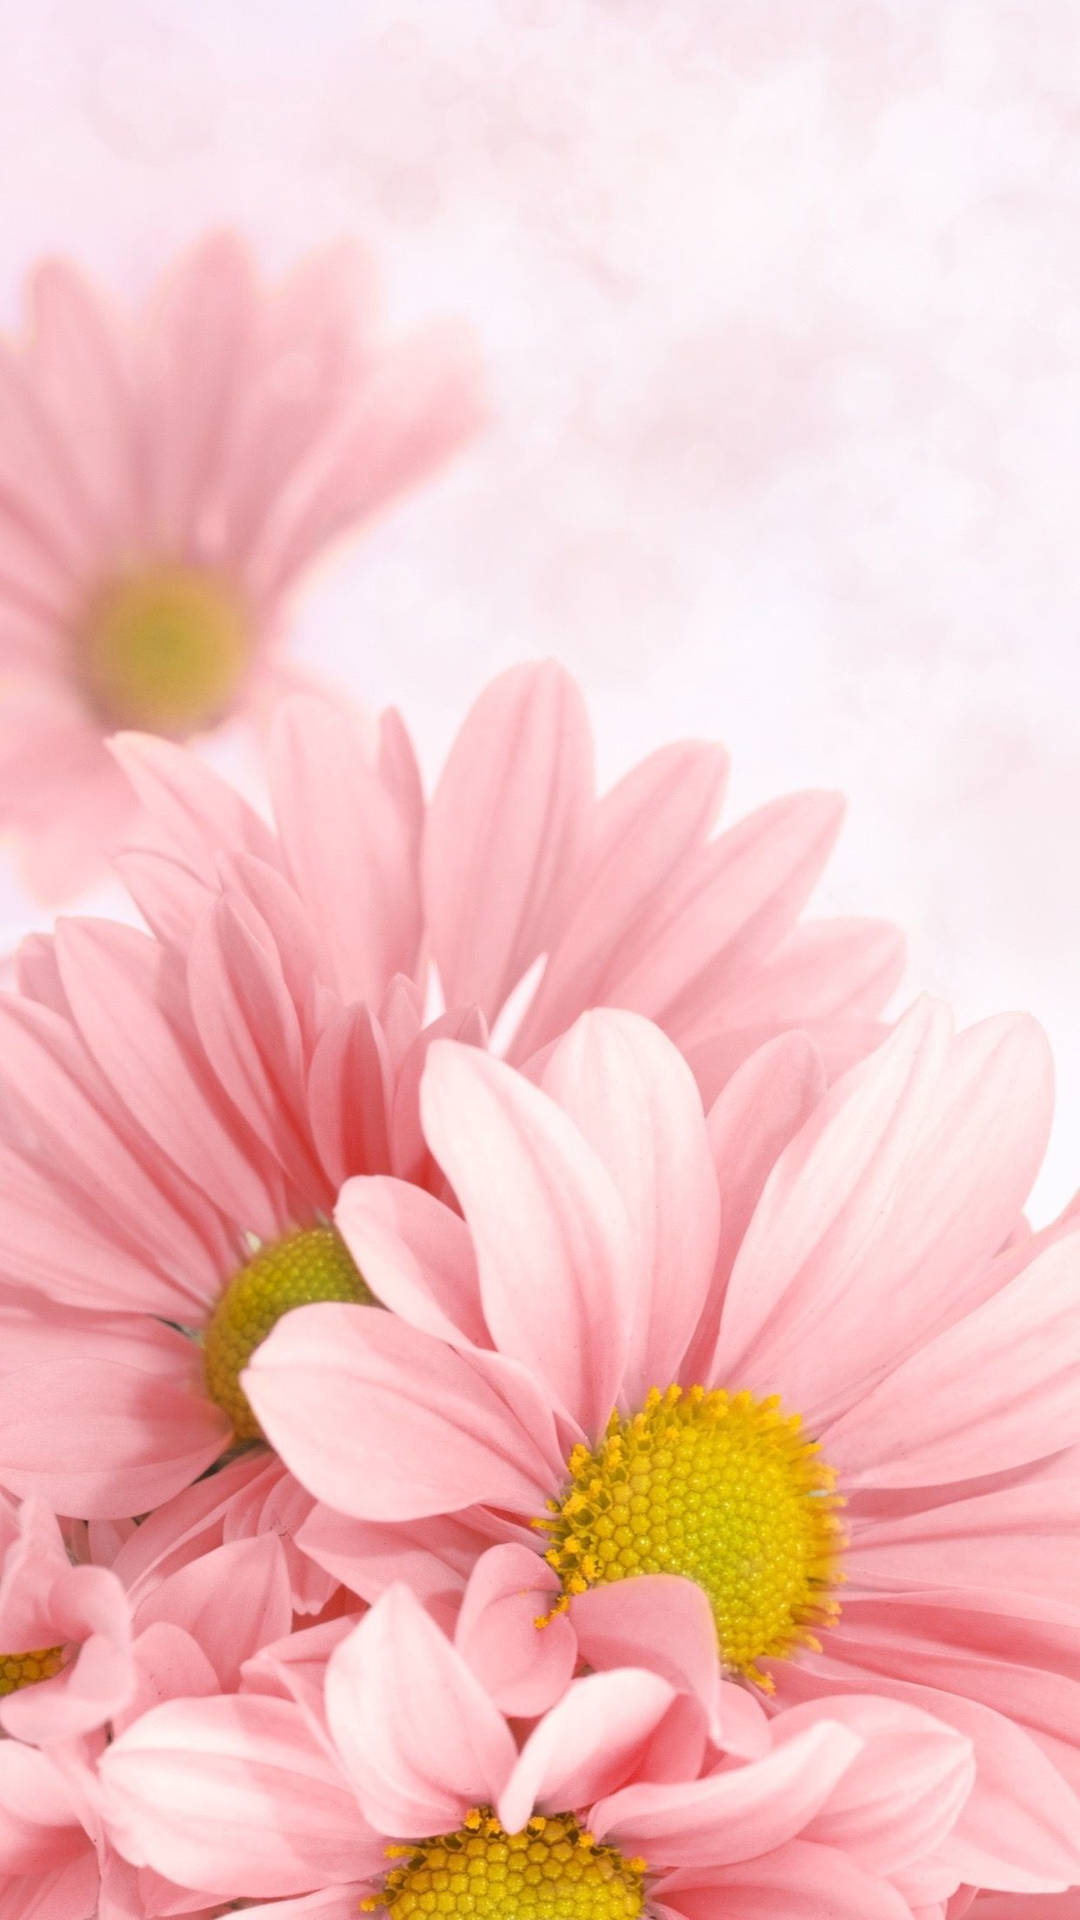 Vibrant Pink Daisy on a Smartphone Wallpaper